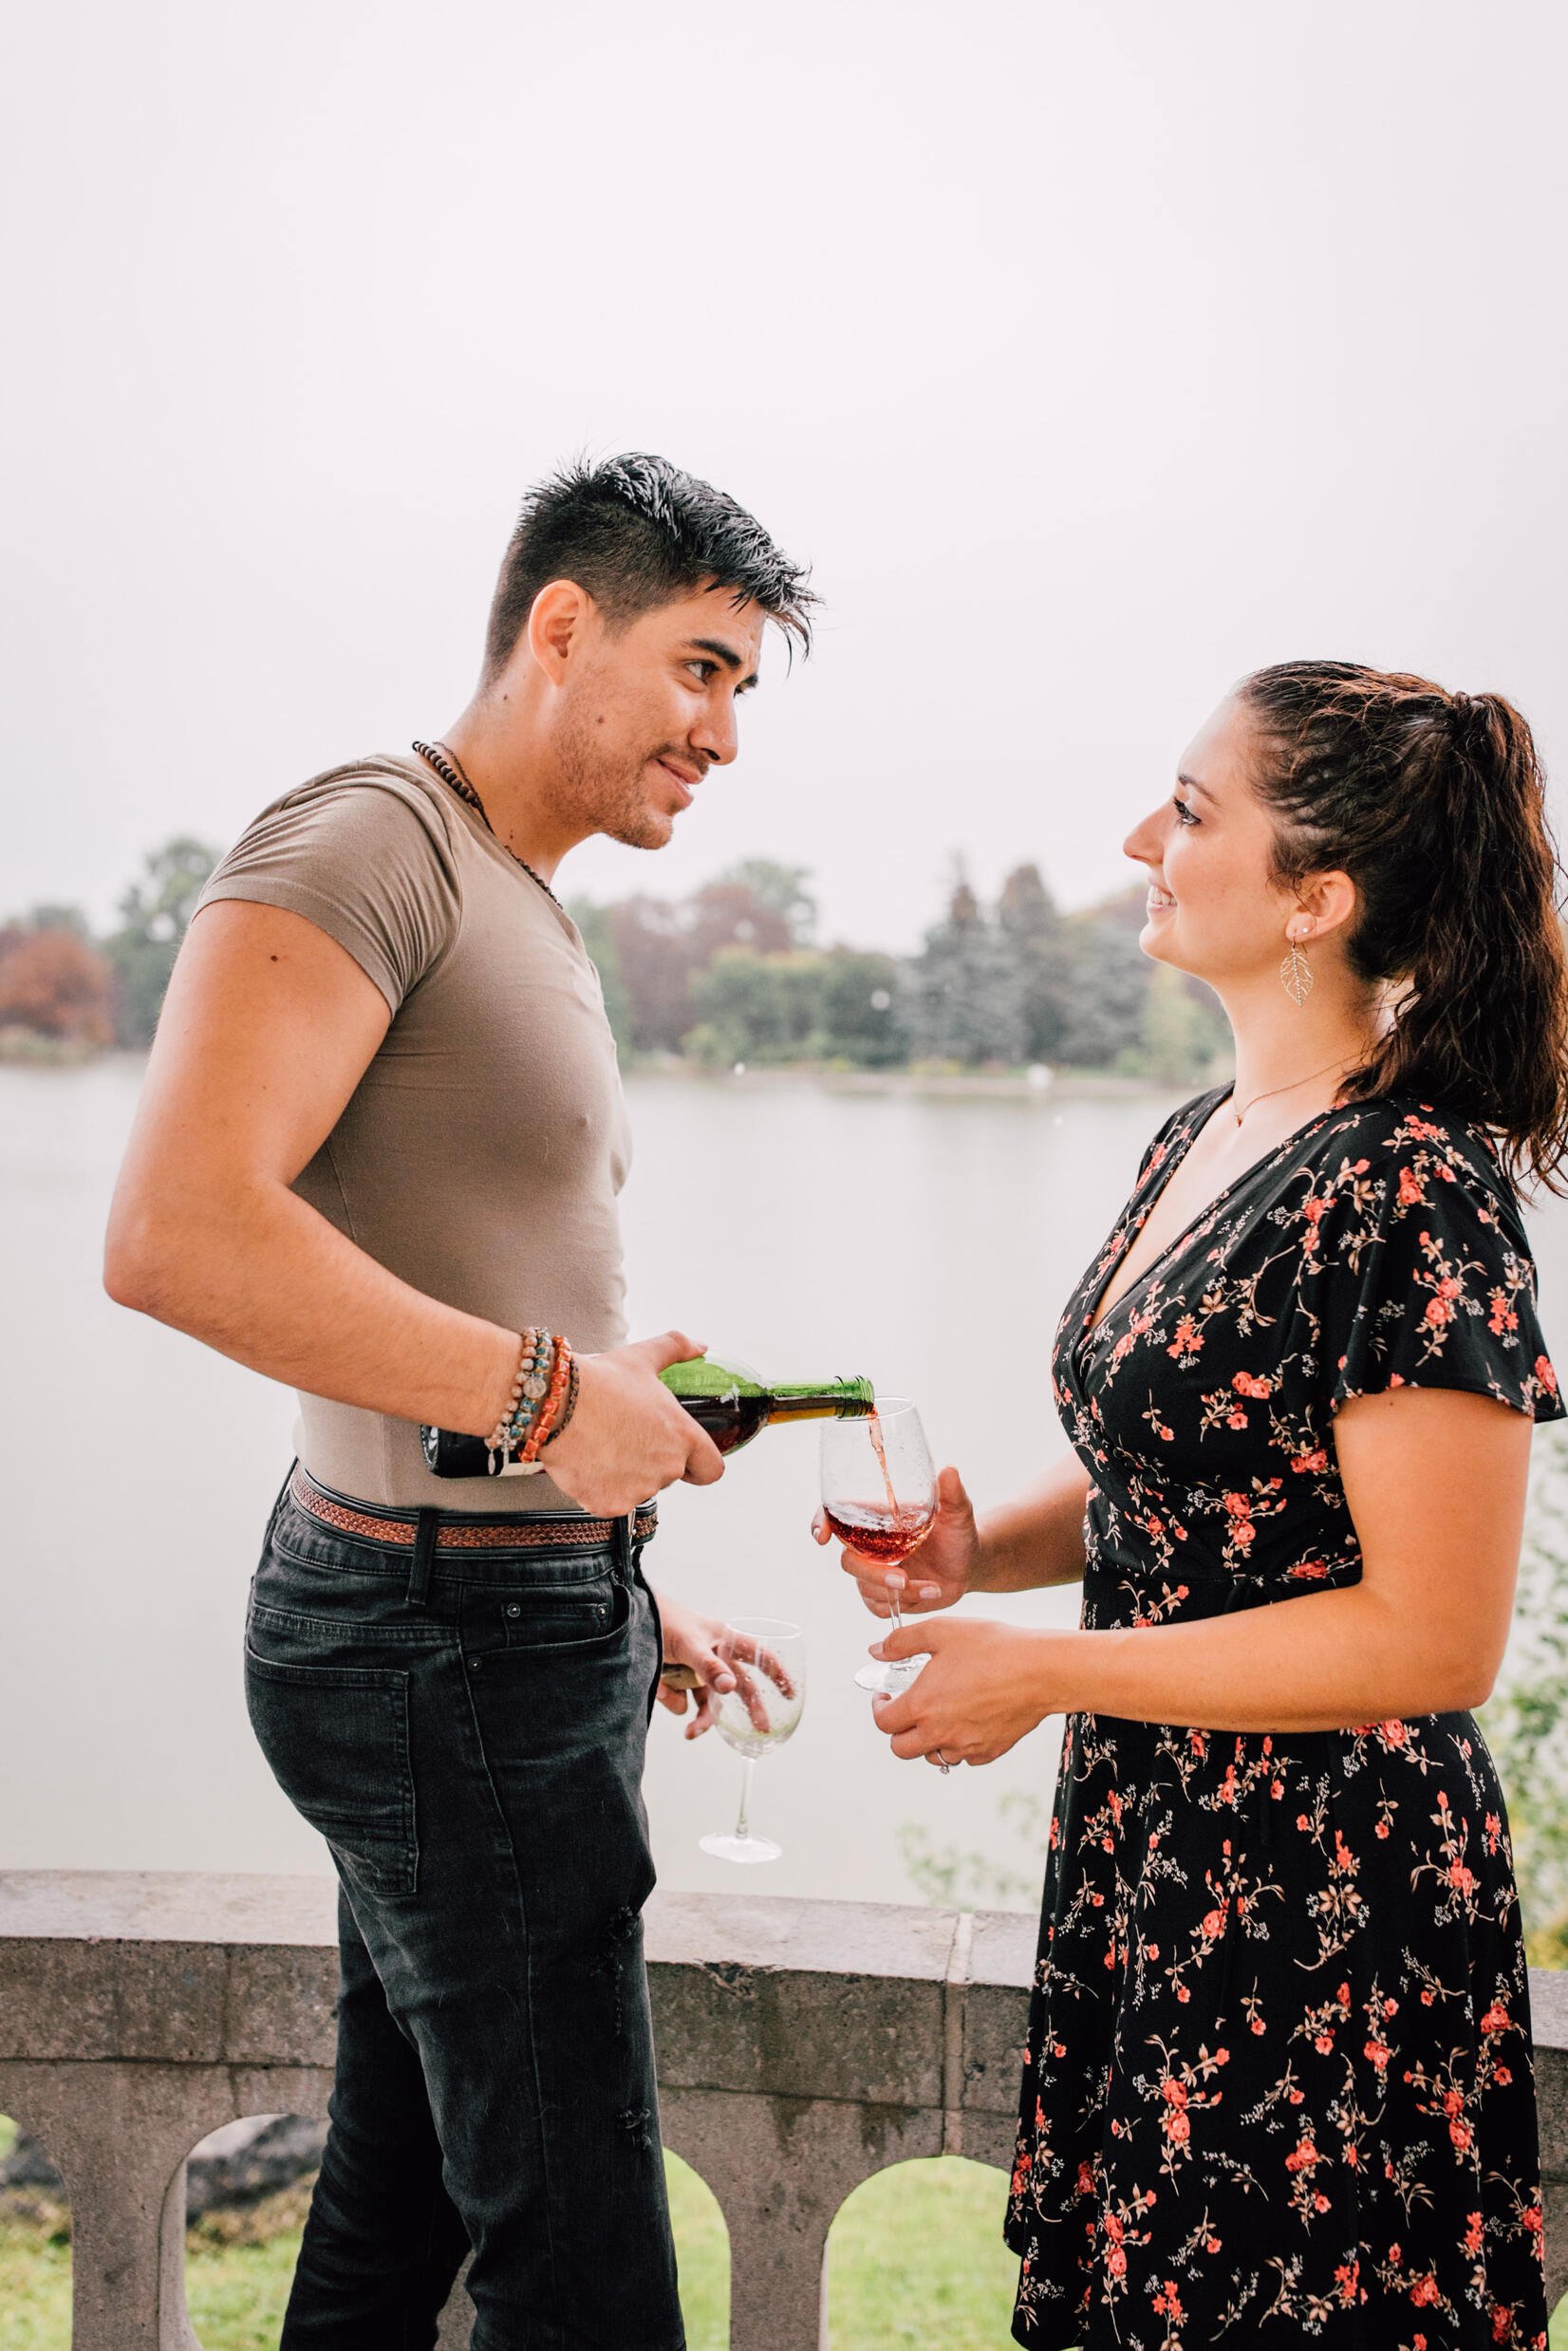  pablo pours wine into jessica’s glass as they look intently at one another during their romantic photoshoot 